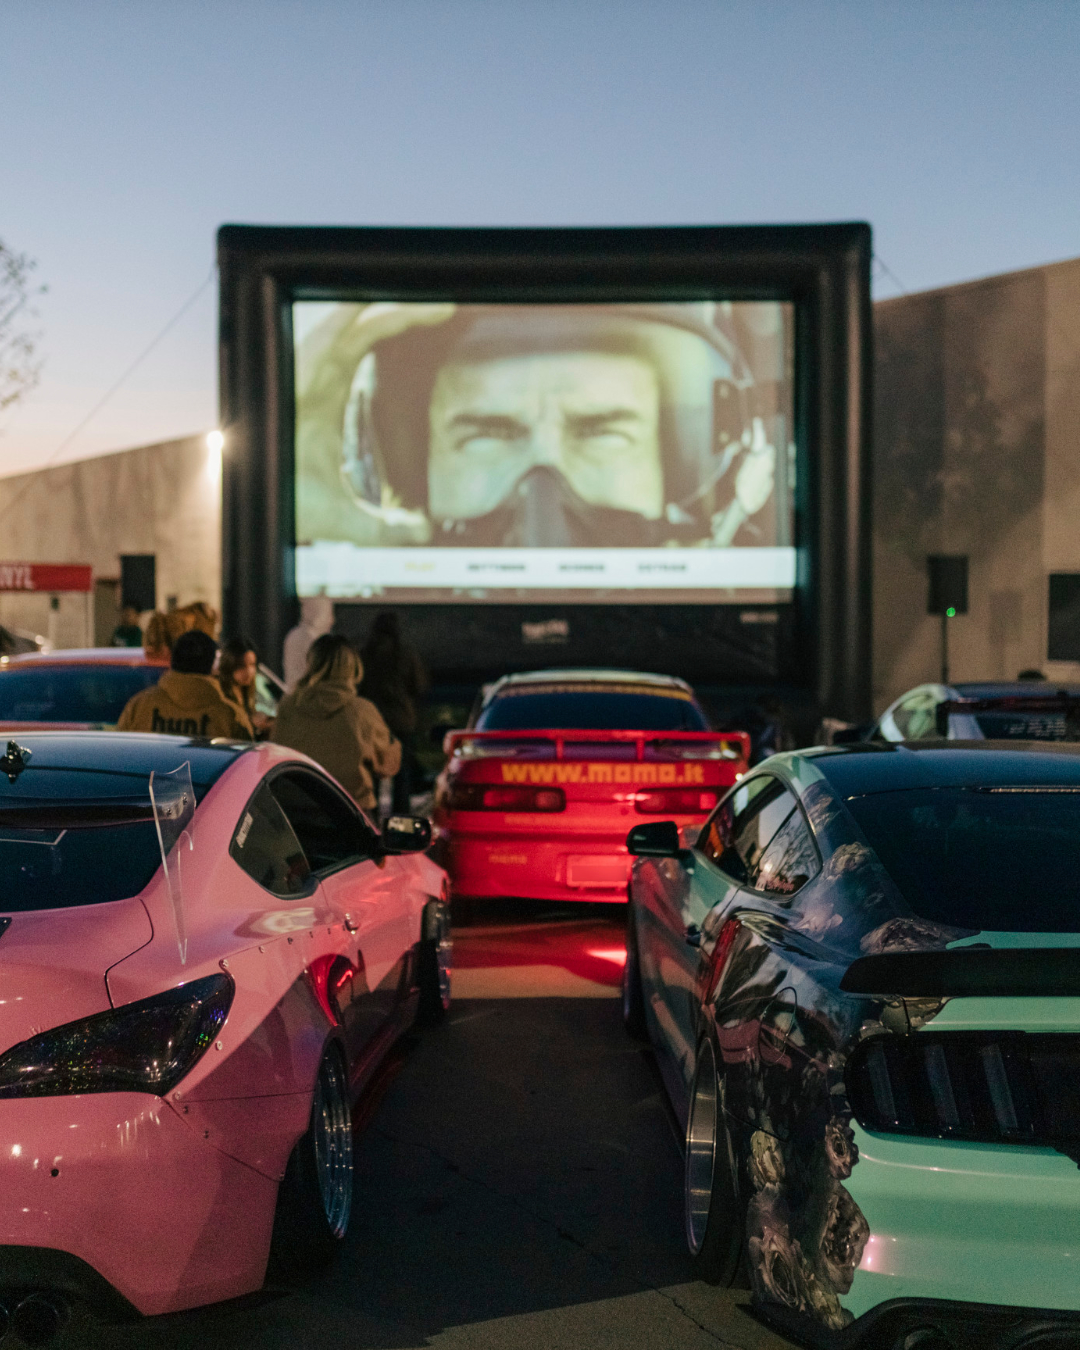 FunFlicks® outdoor movie screen rental drive in at a local car meet